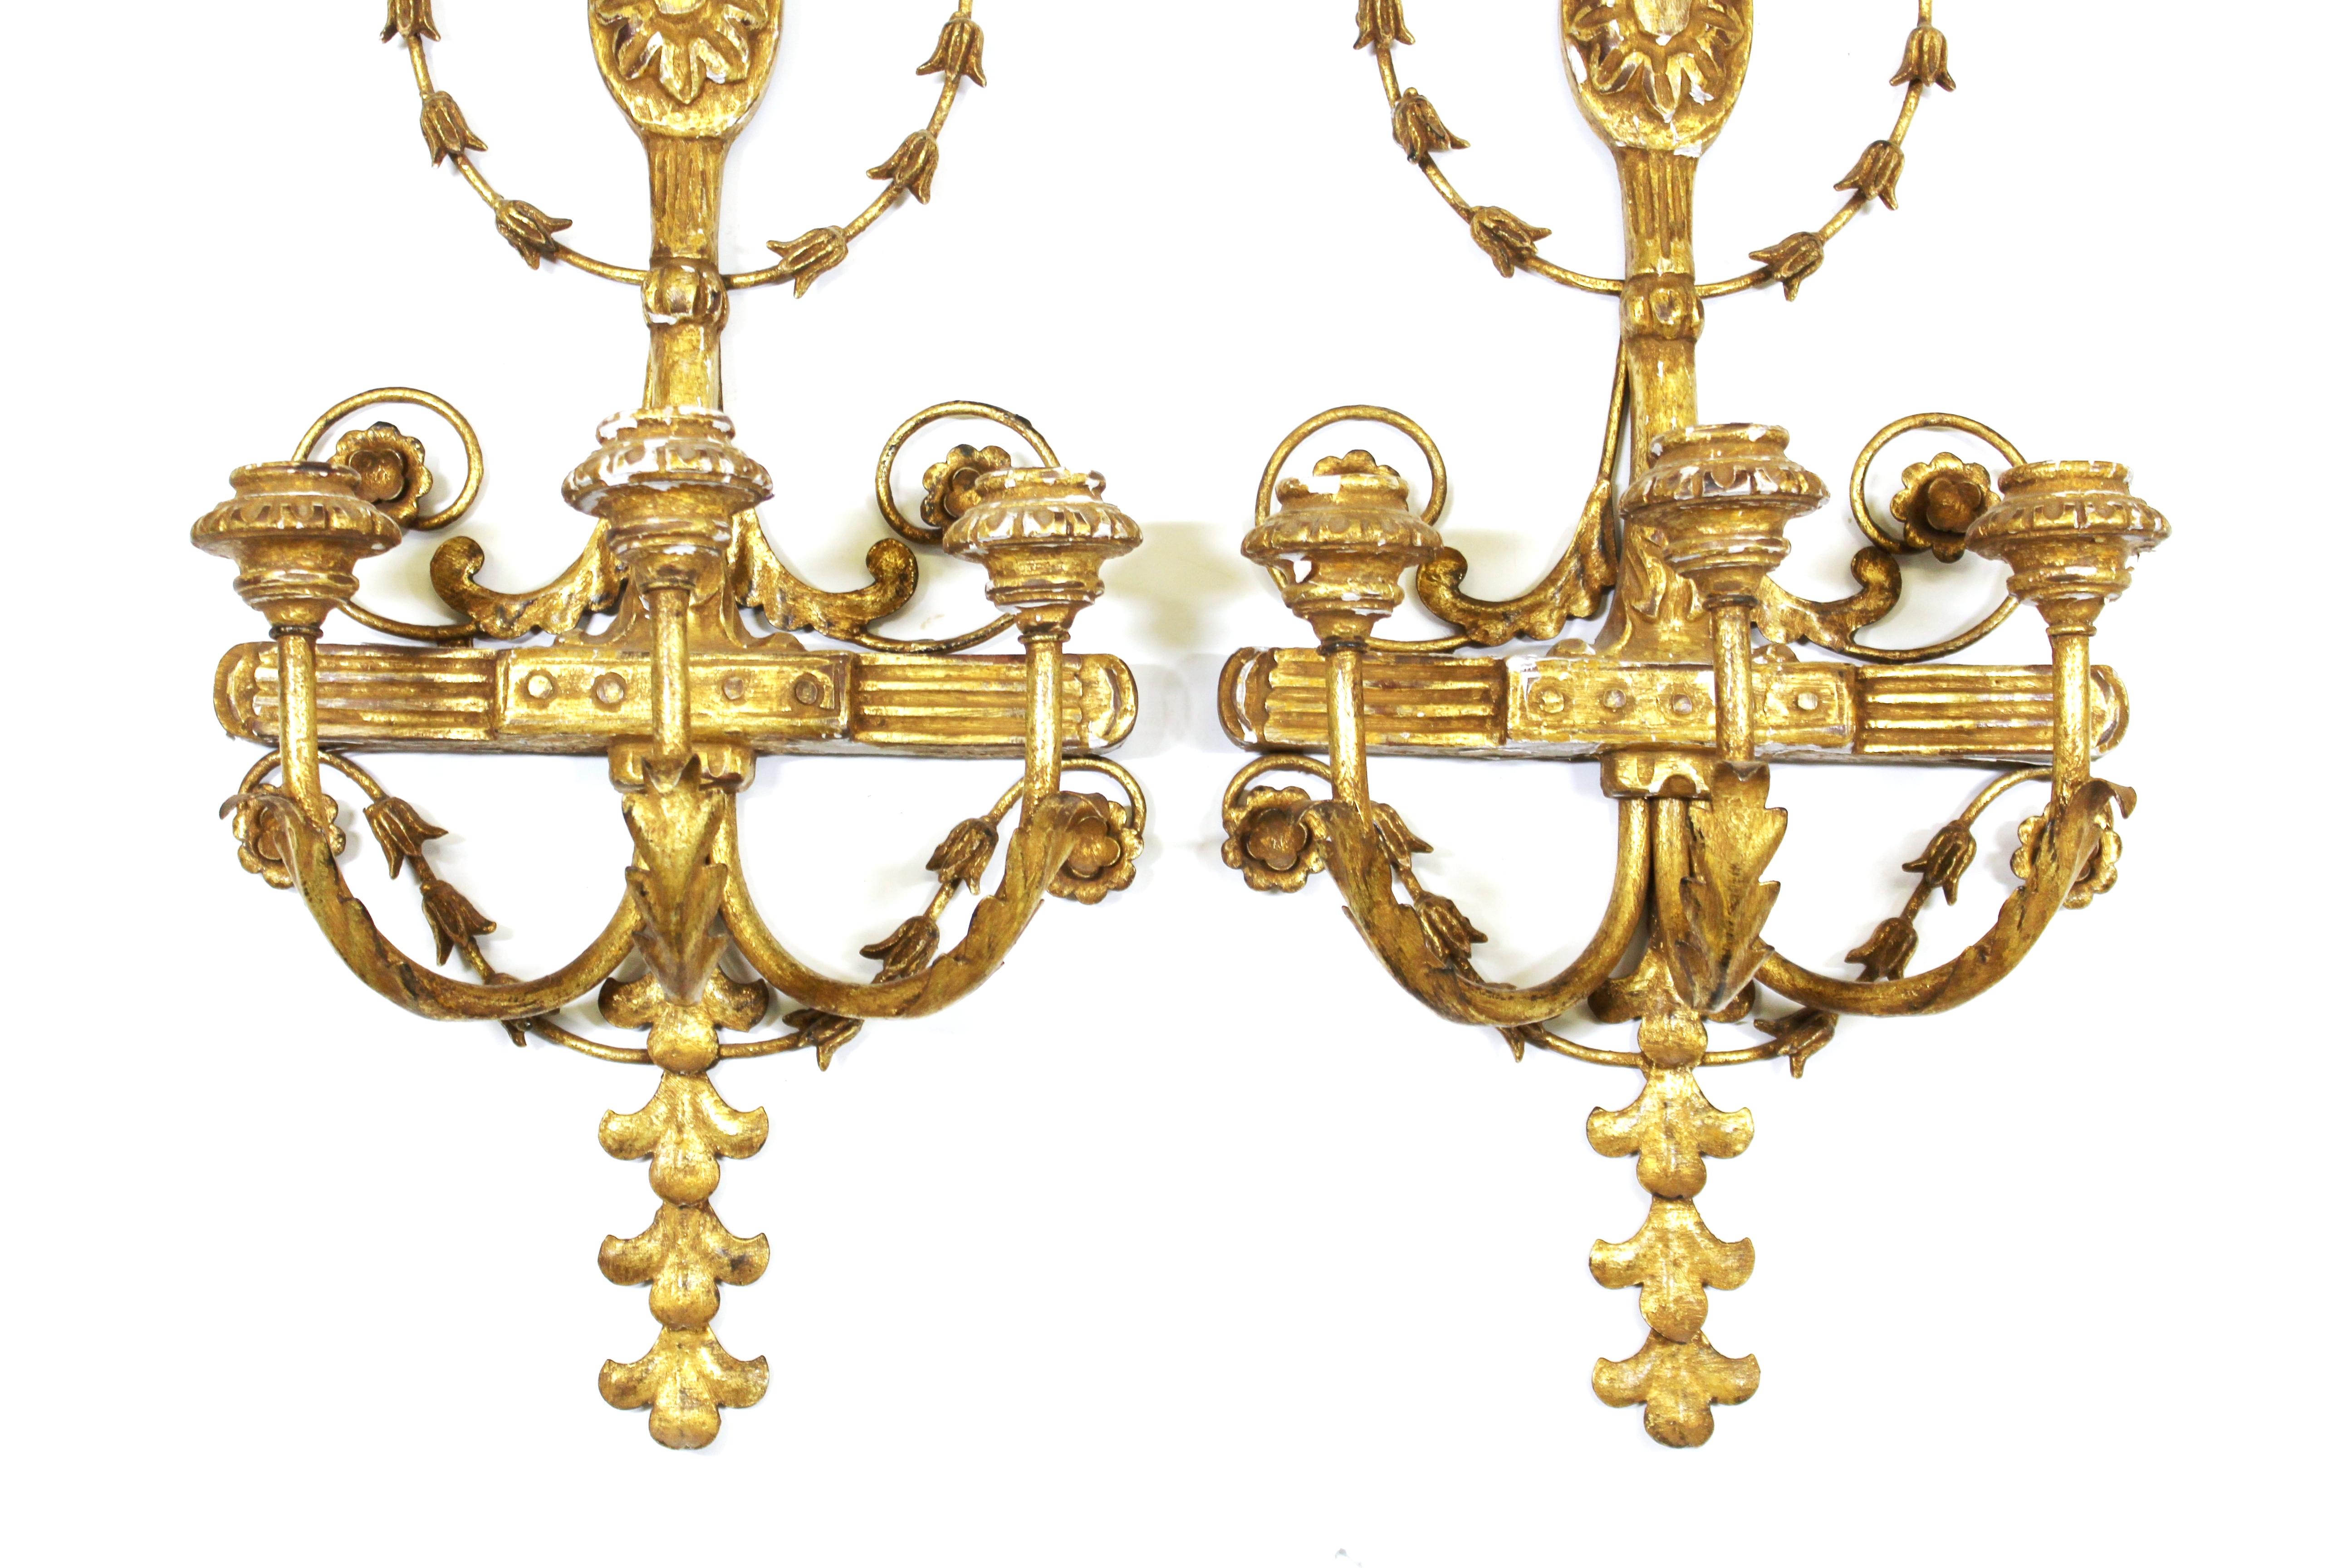 Italian pair of Empire Revival style wall candle sconces in carved giltwood. 'Made in Italy' marks on the backs. In great vintage condition with age-appropriate wear and distressed look.